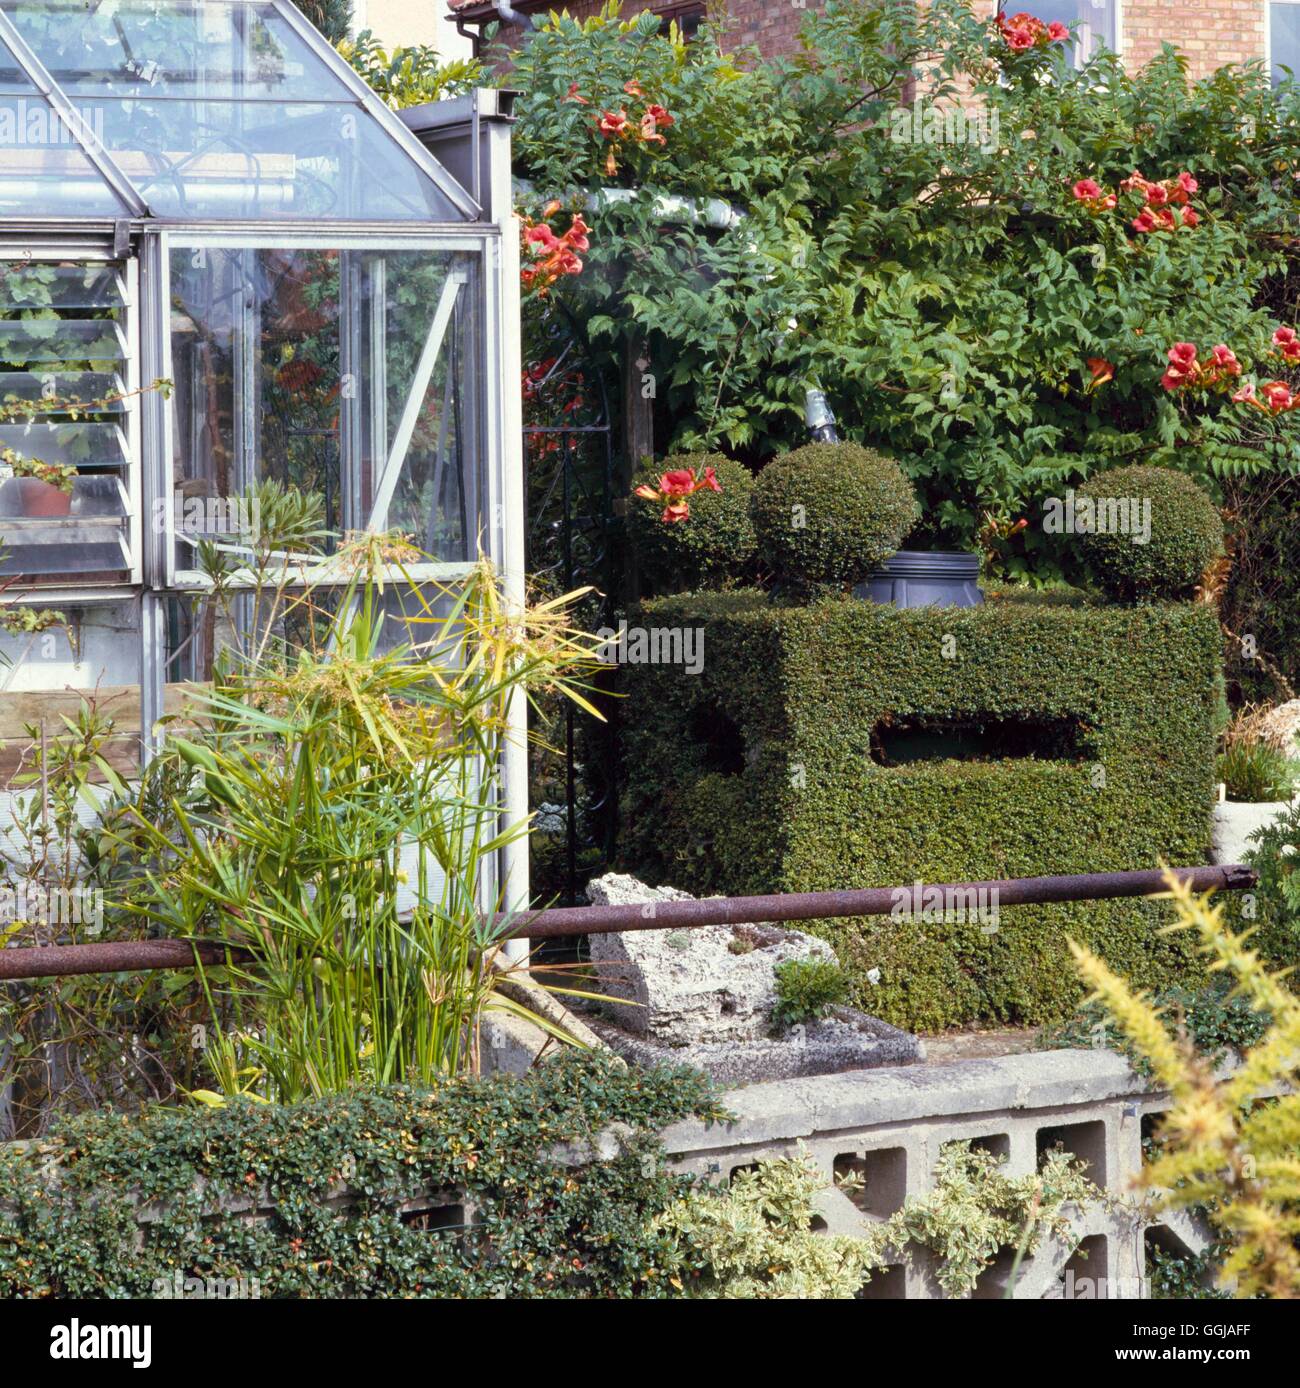 Greenhouse and Garden   GHG025156 Stock Photo